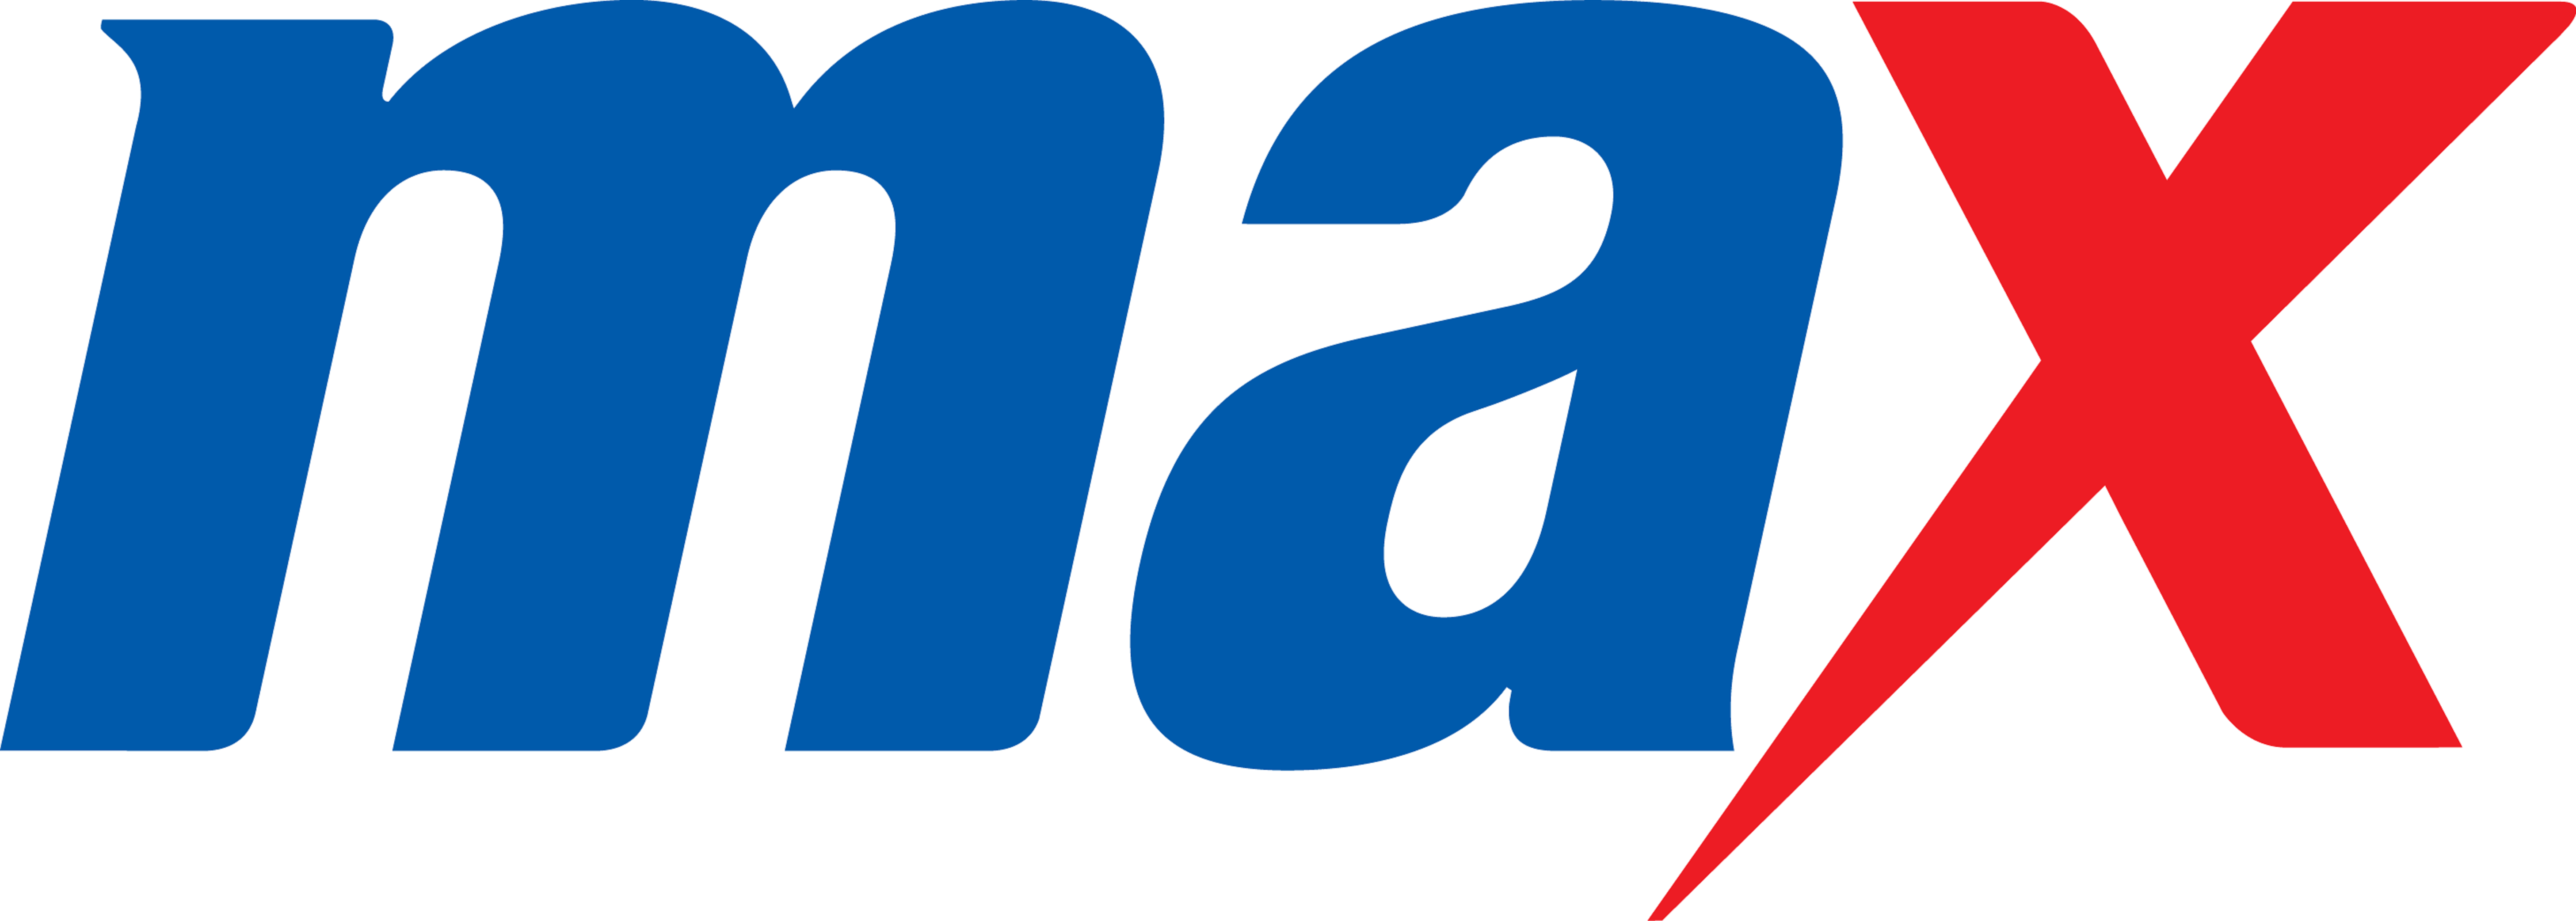 Max Logo - File:Logo of Max Fashion and Accessories, March 2018.png